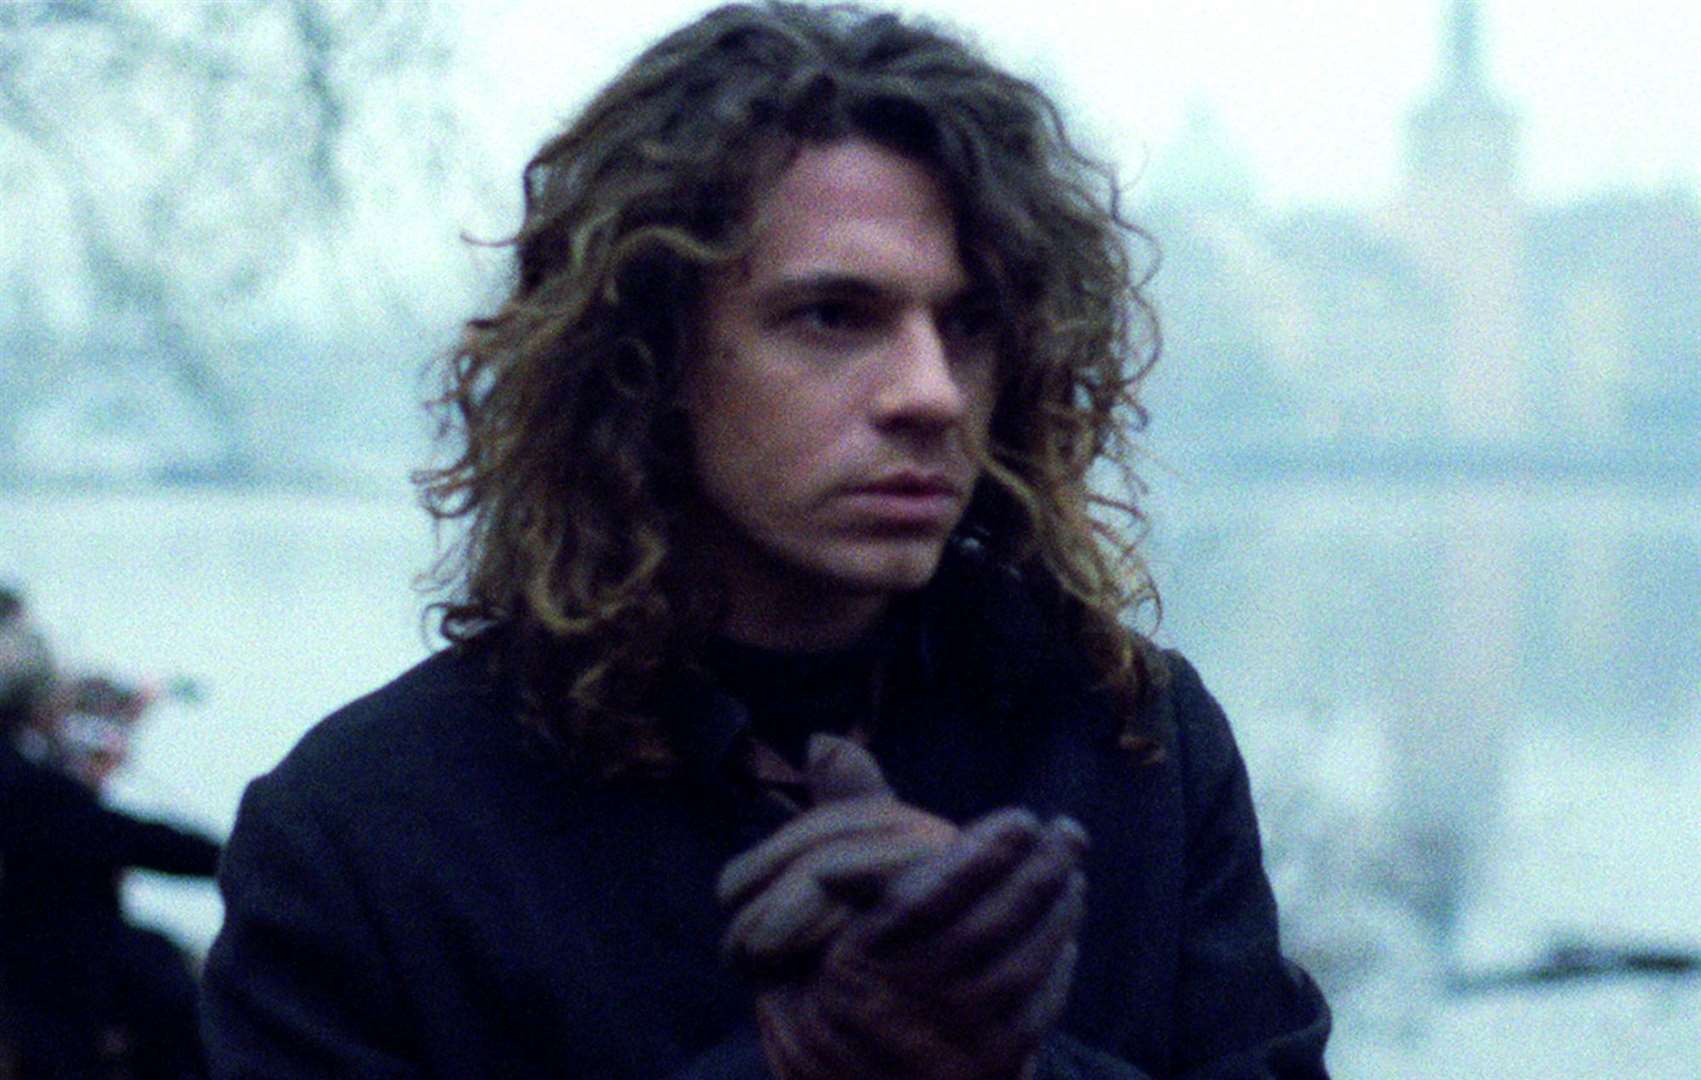 Michael Hutchence's life is examined in the Mystify film